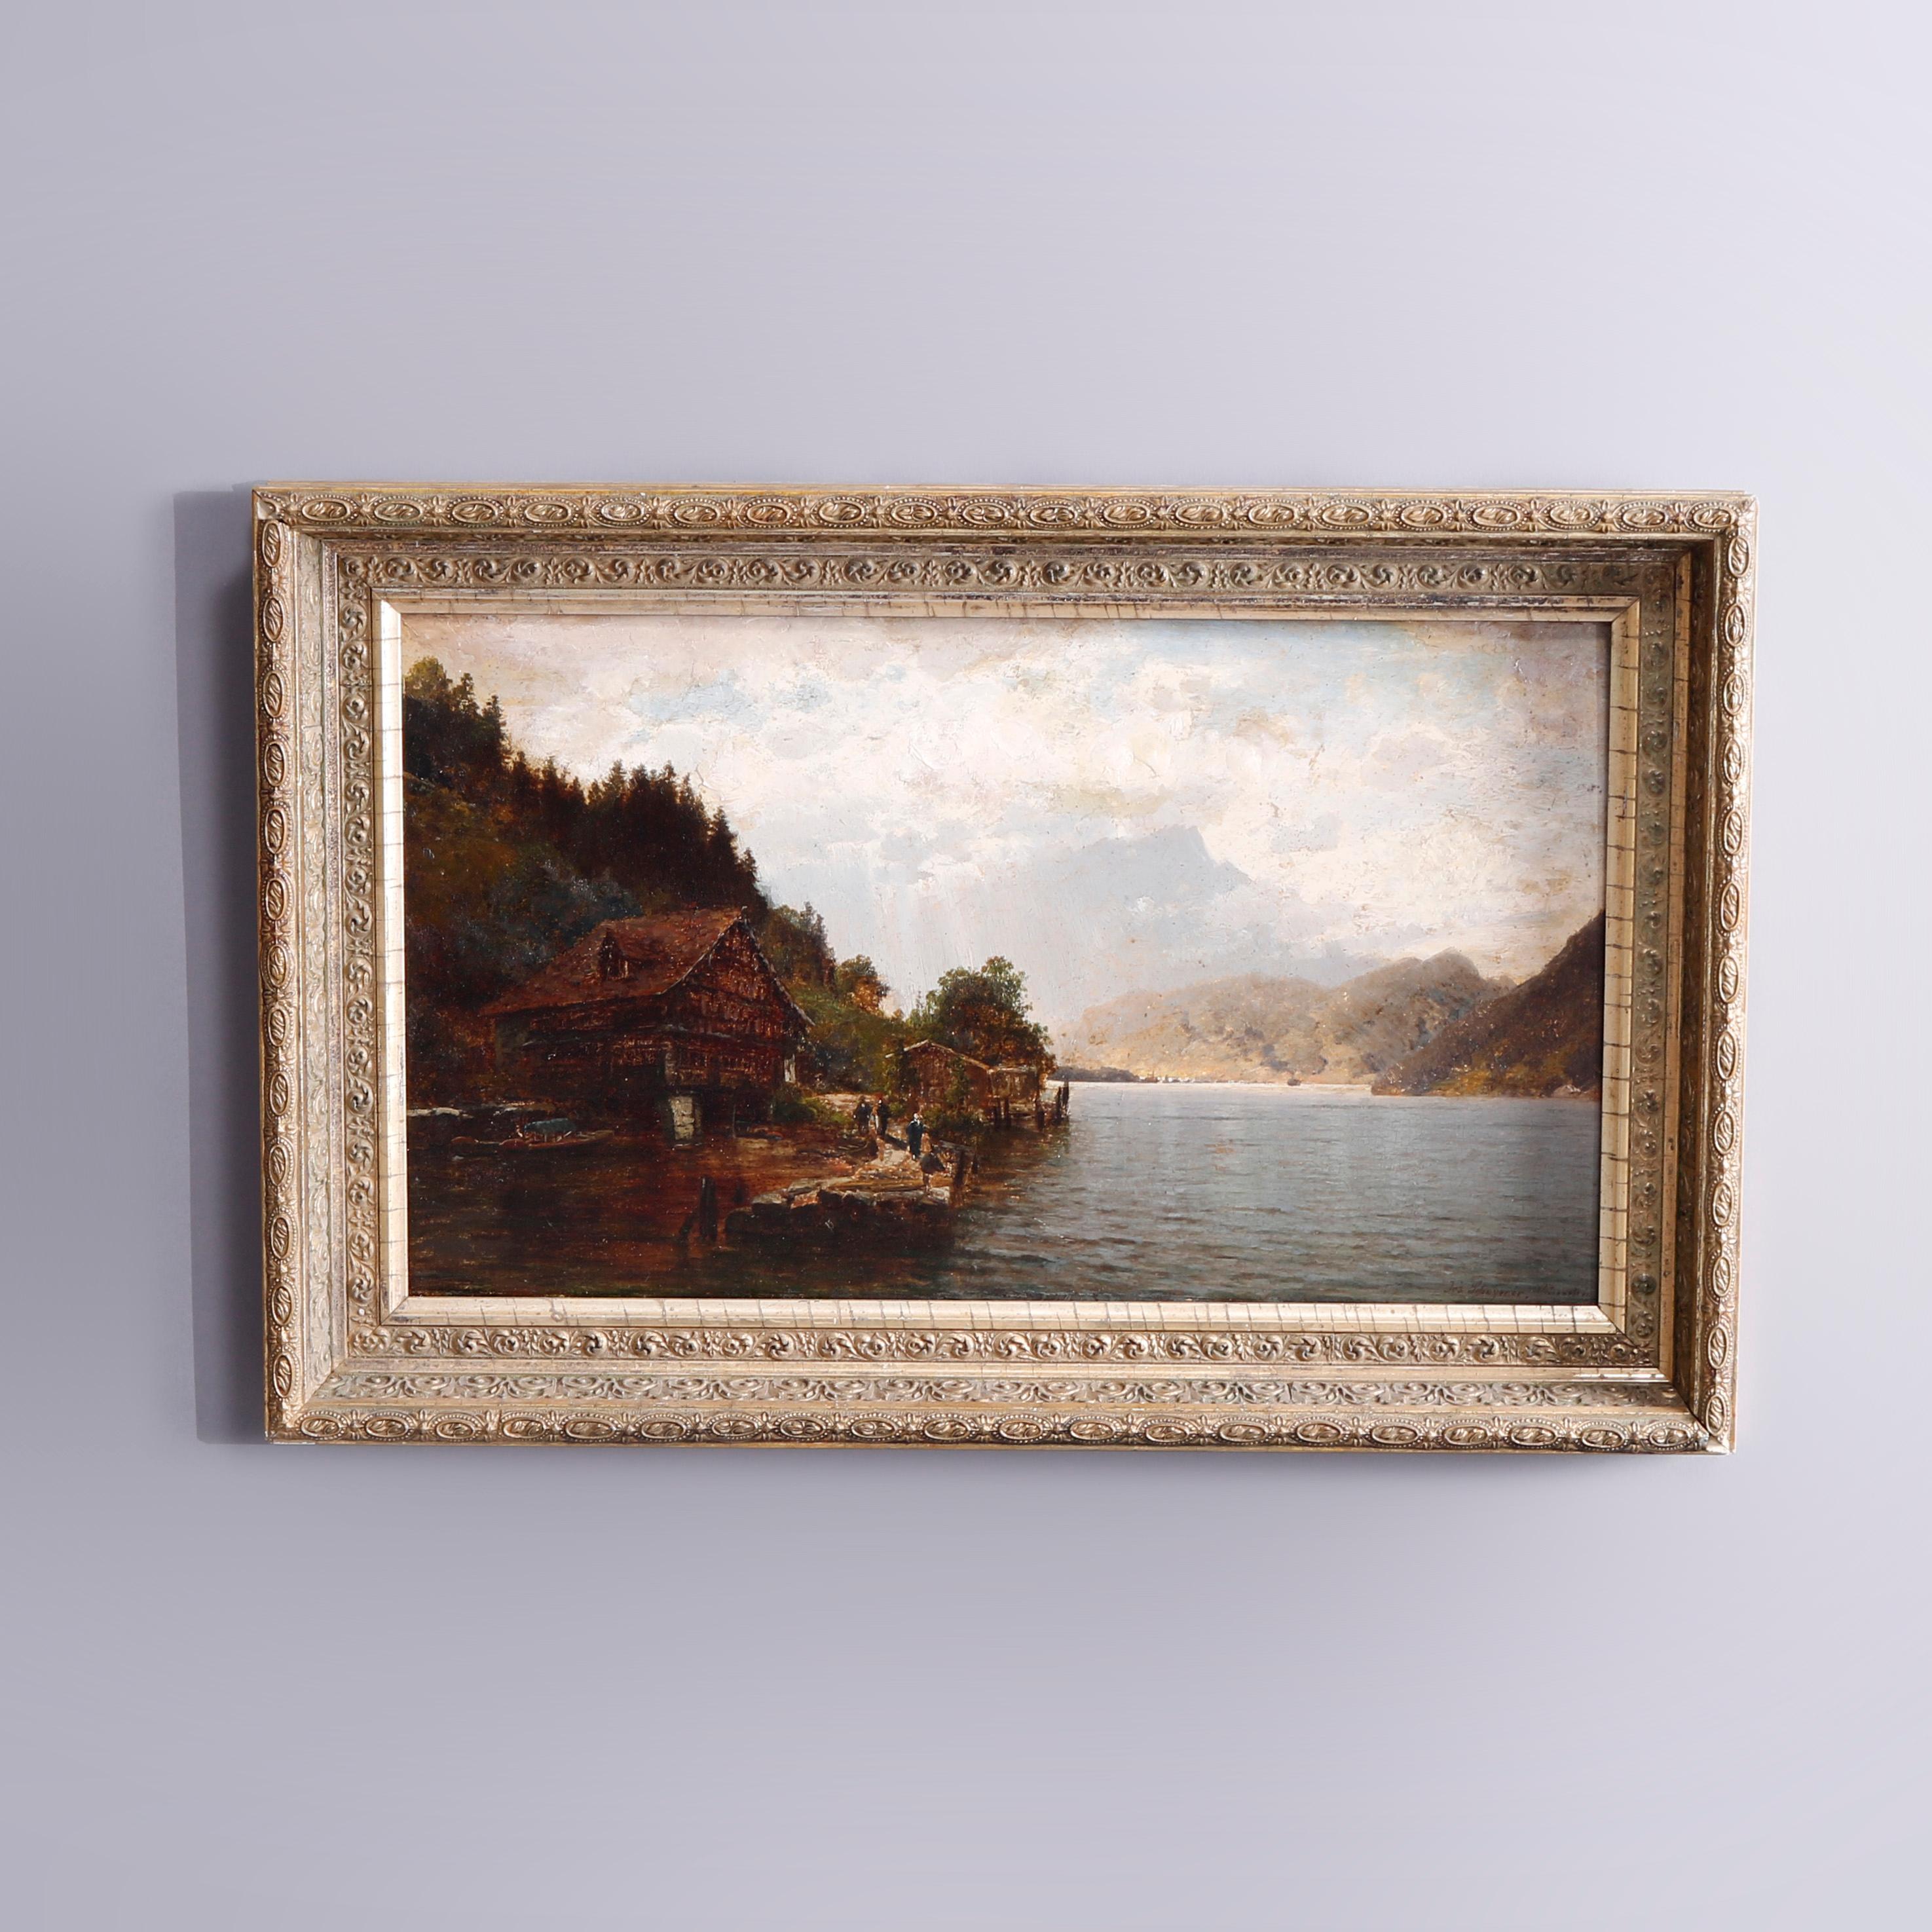 An antique German painting by Josef Schoyerer offers oil on board lakeside scene with structure, boats and figures, artist signed lower right, seated in giltwood frame, 19th century. Josef Schoyerer (1844-1923), Munich landscape